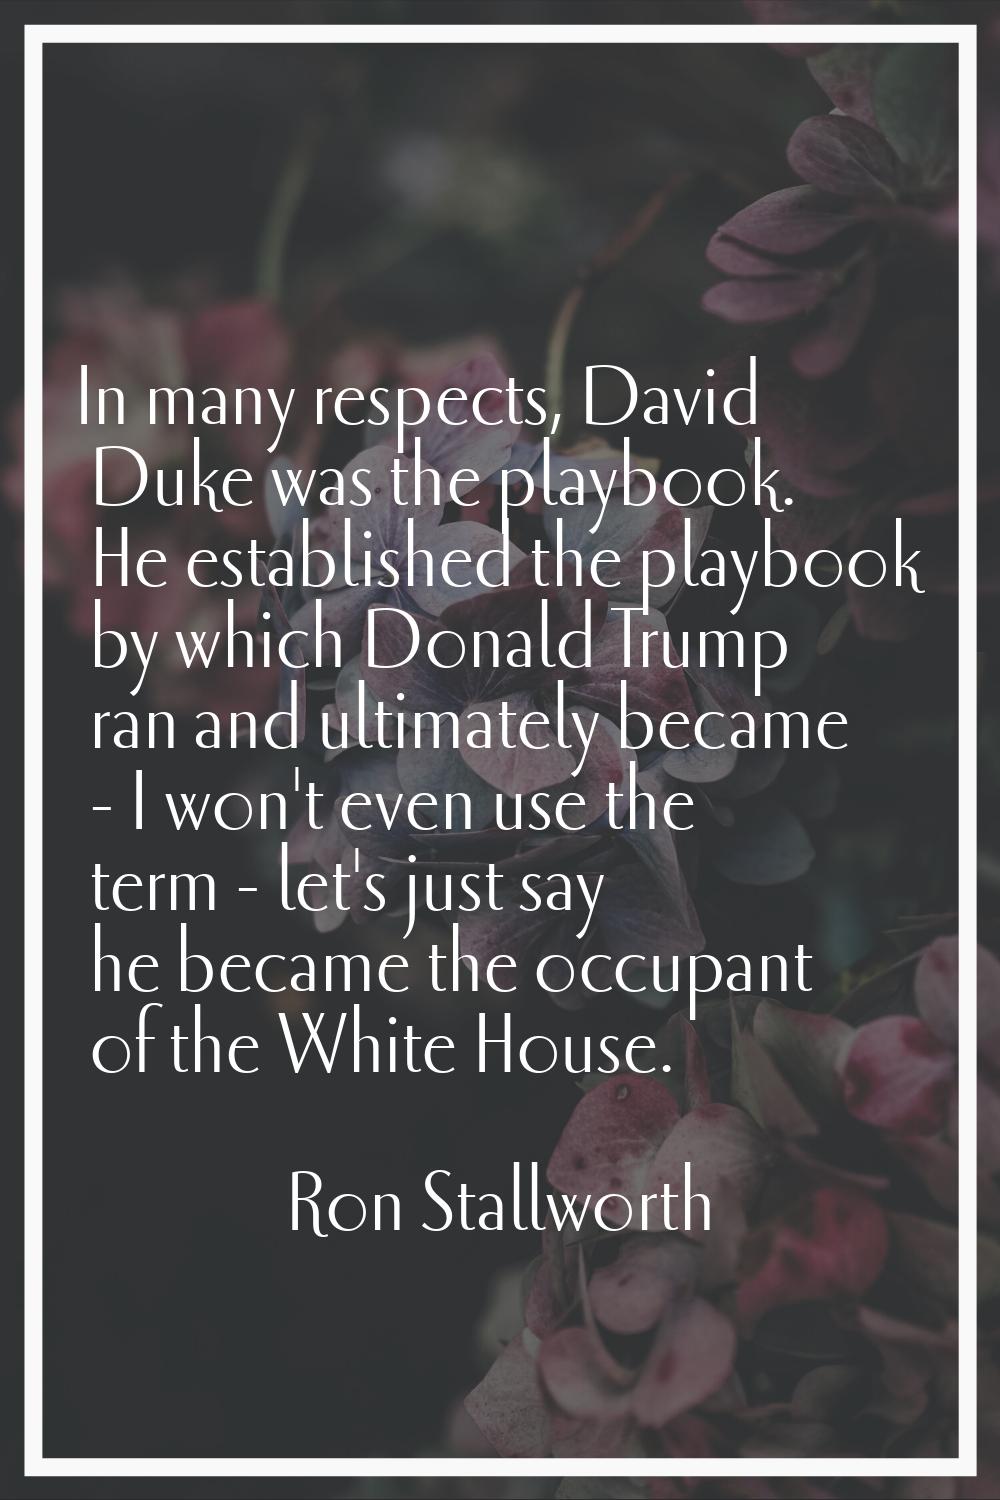 In many respects, David Duke was the playbook. He established the playbook by which Donald Trump ra